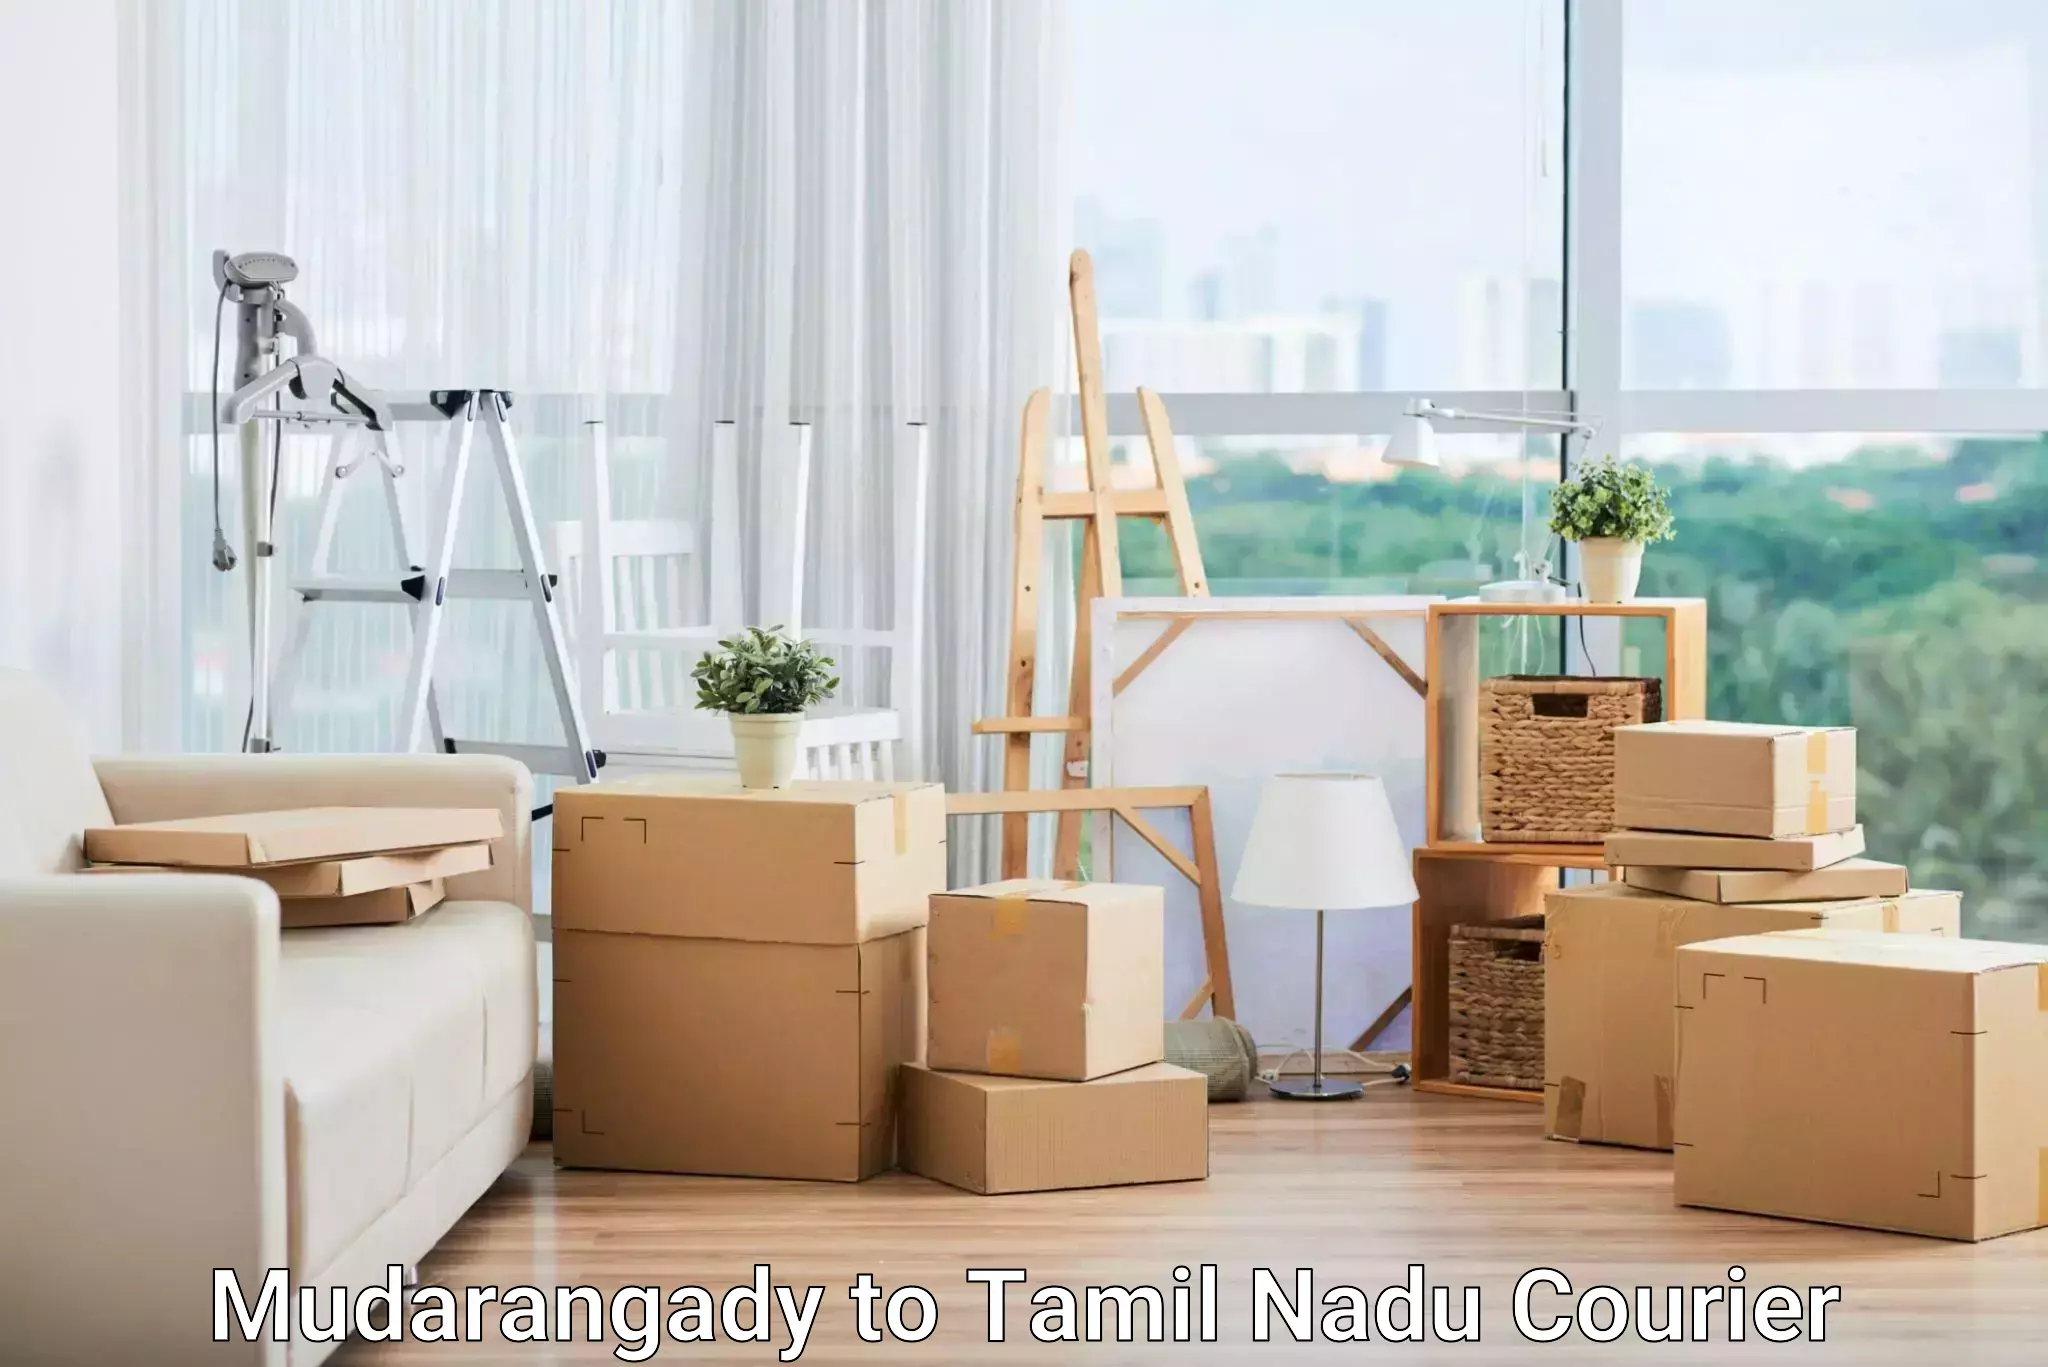 Fast shipping solutions Mudarangady to Hosur